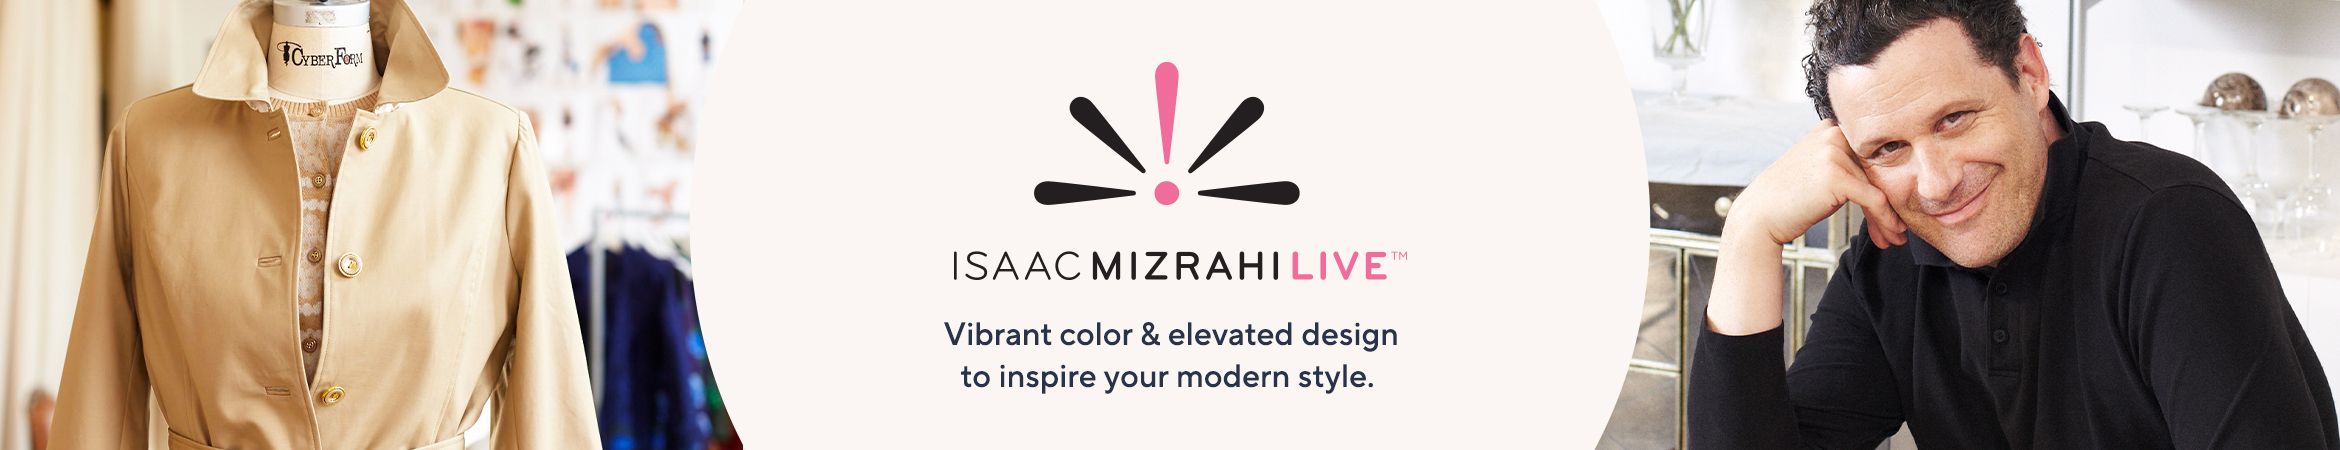 Isaac Mizrahi Live!(TM).  Vibrant color & elevated design to inspire your modern style.